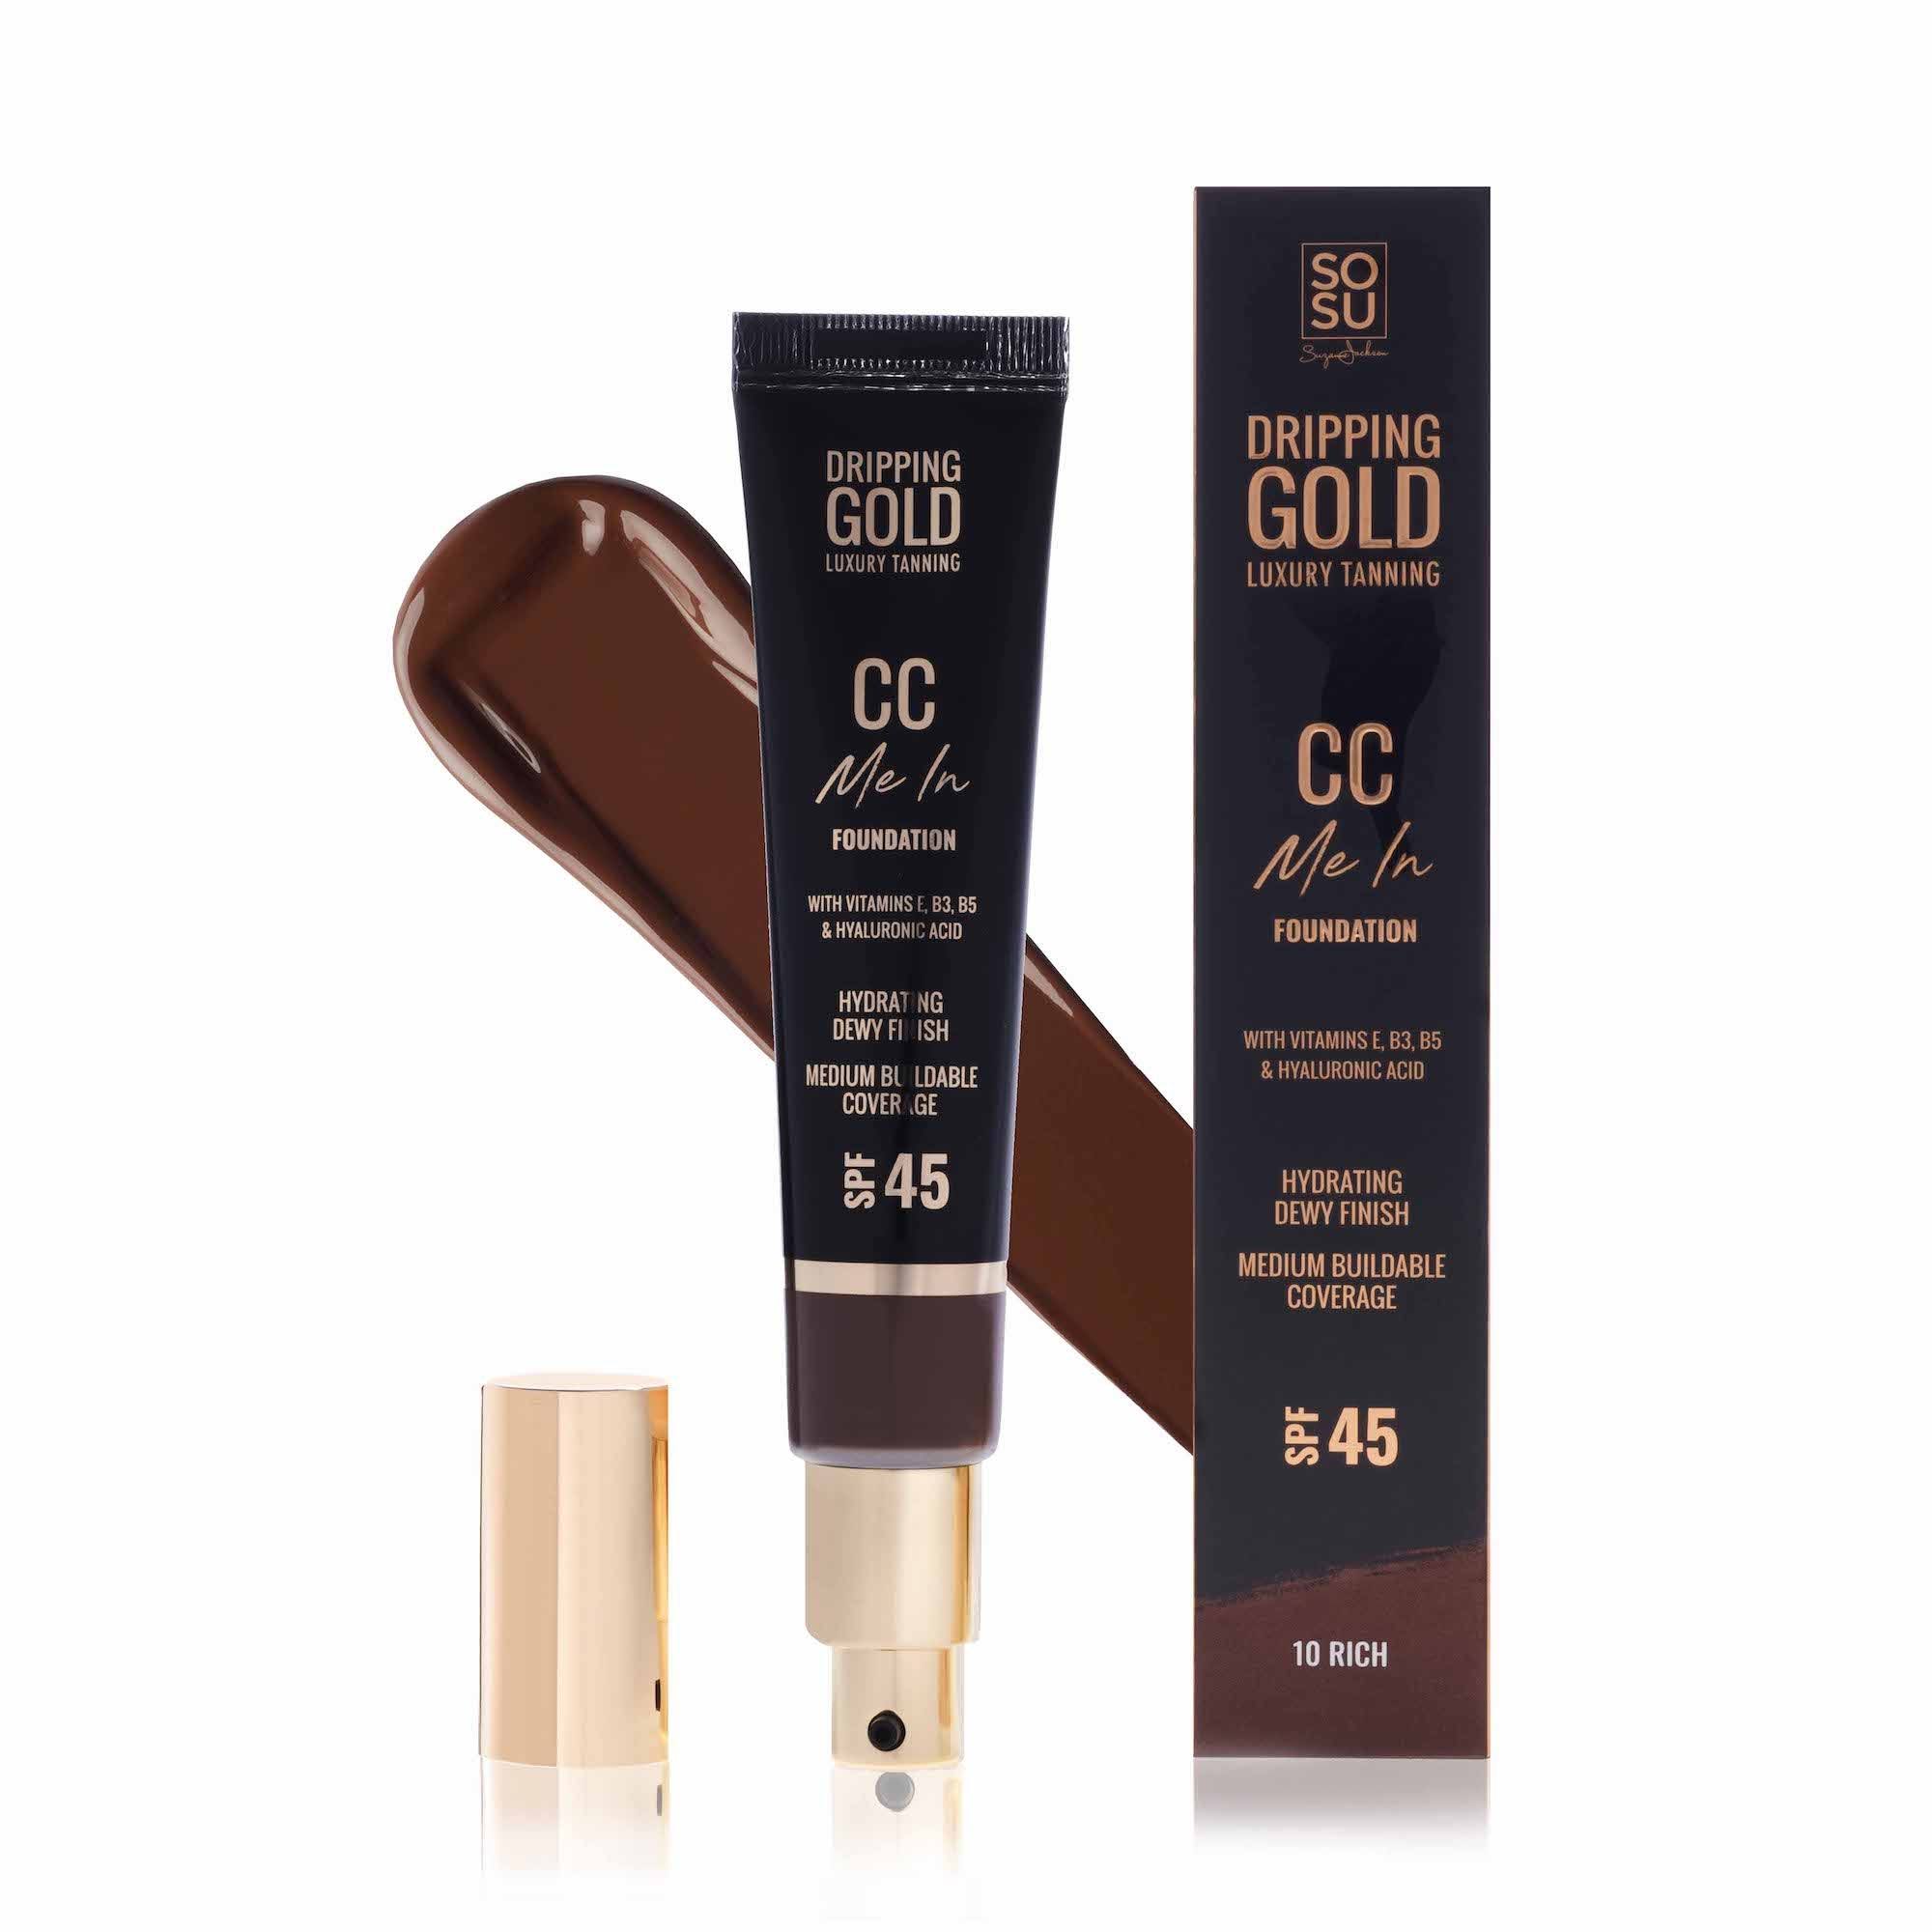 Dripping Gold CC Me in Foundation SPF4510 Rich